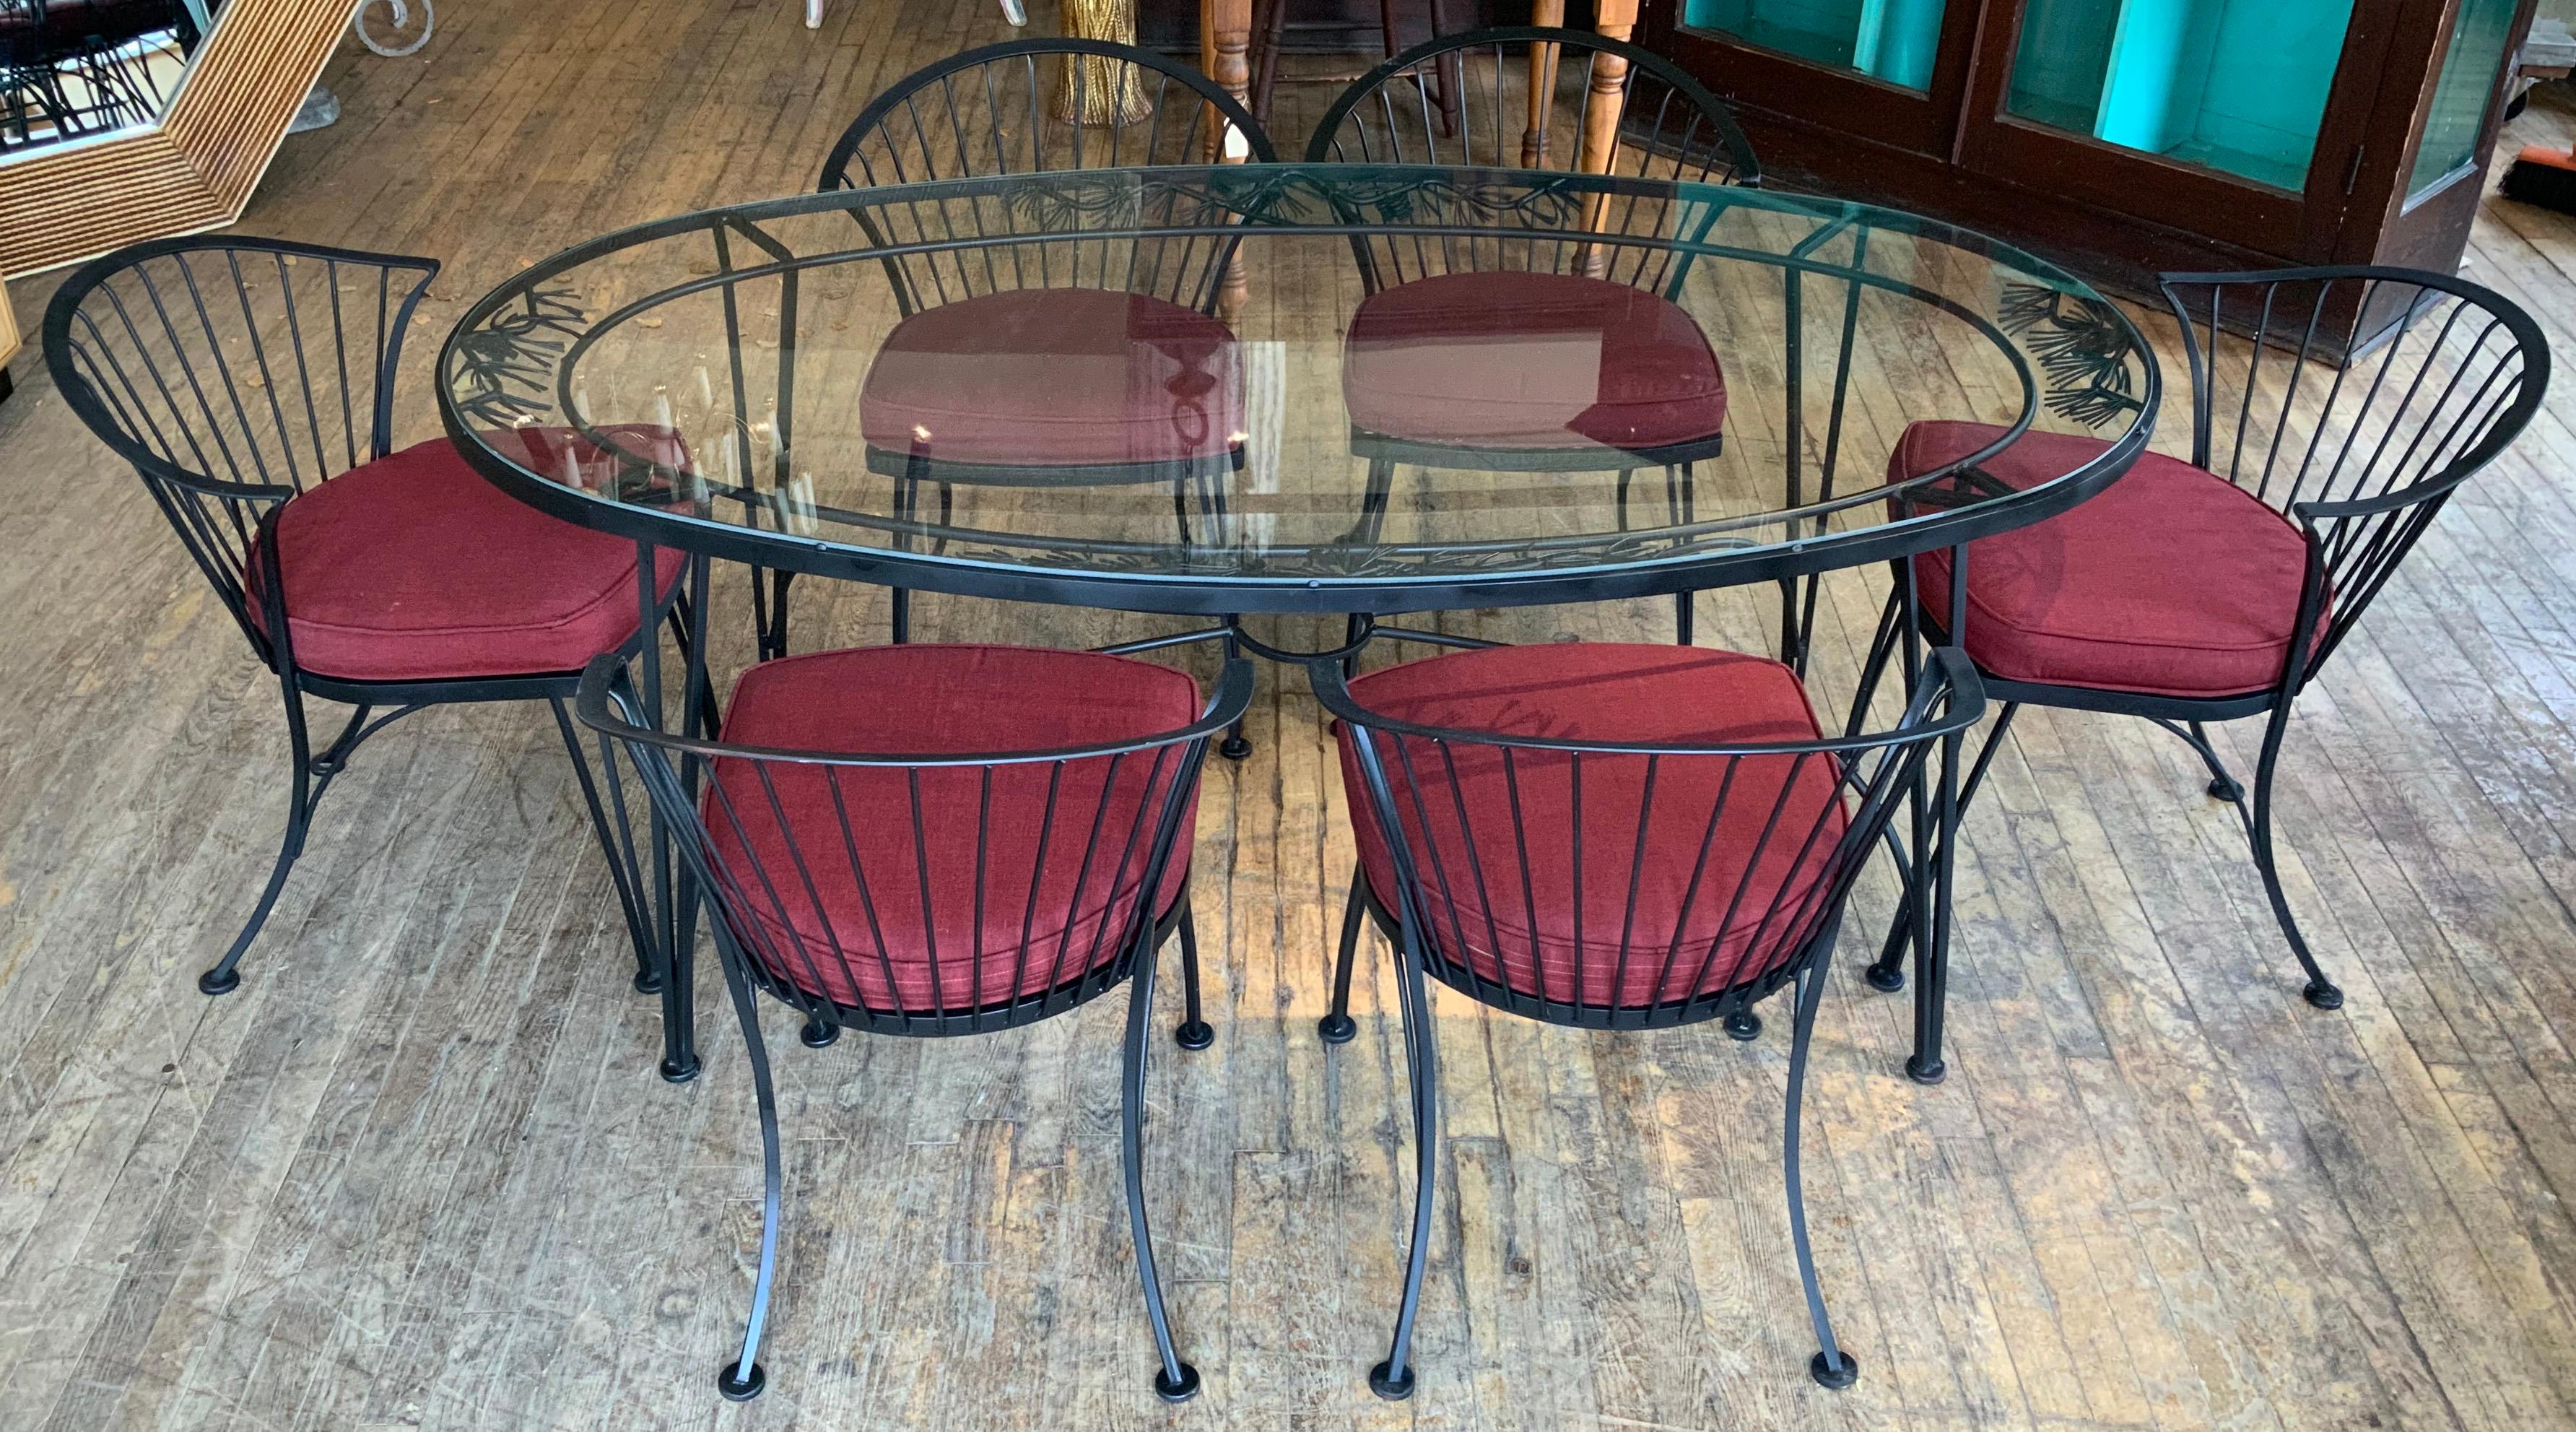 A vintage 1950s wrought iron garden dining set by Woodard. 'Pinecrest' was one of their most charming designs in the 1950s, named for the pine needle & pinecone motif in the skirt of the dining table. this set consists of the largest oval dining